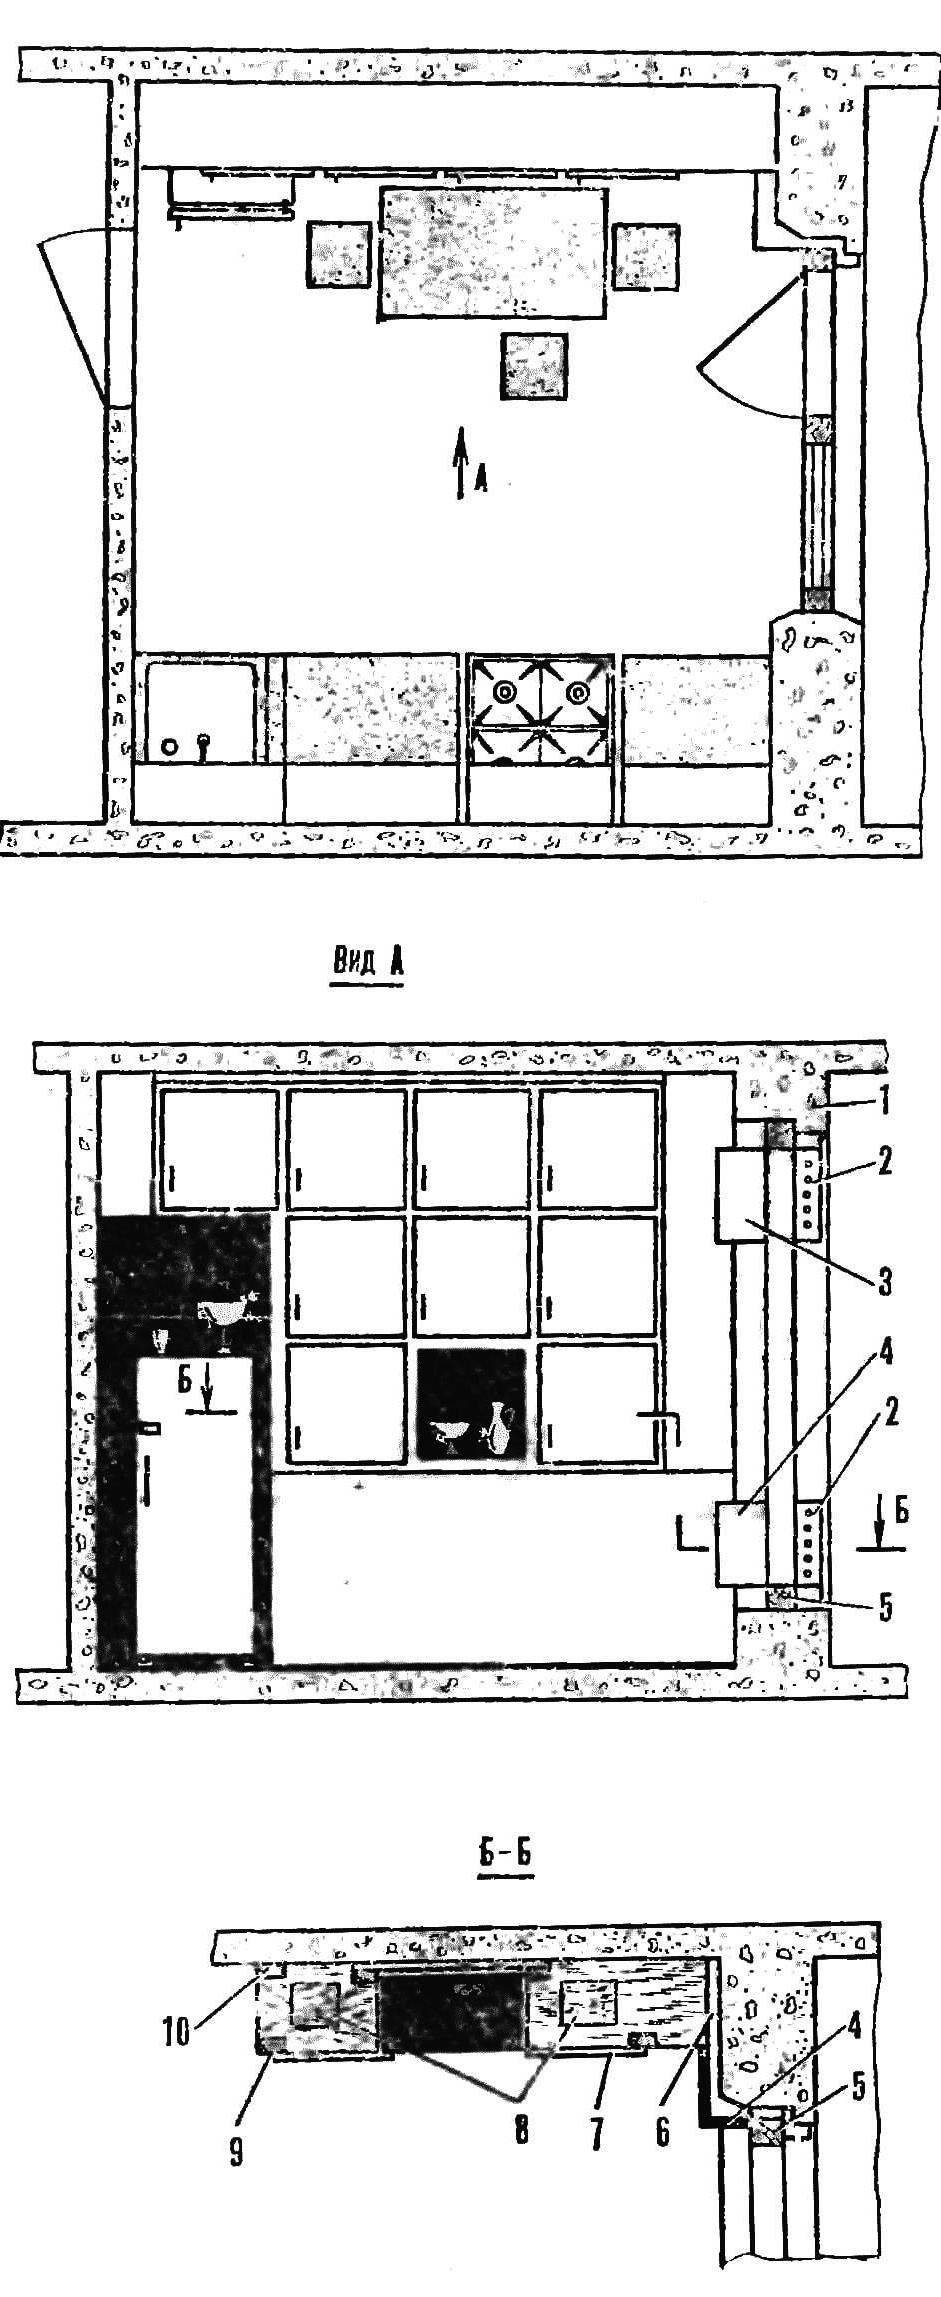 Fig. 1. Wall-pantry for kitchen